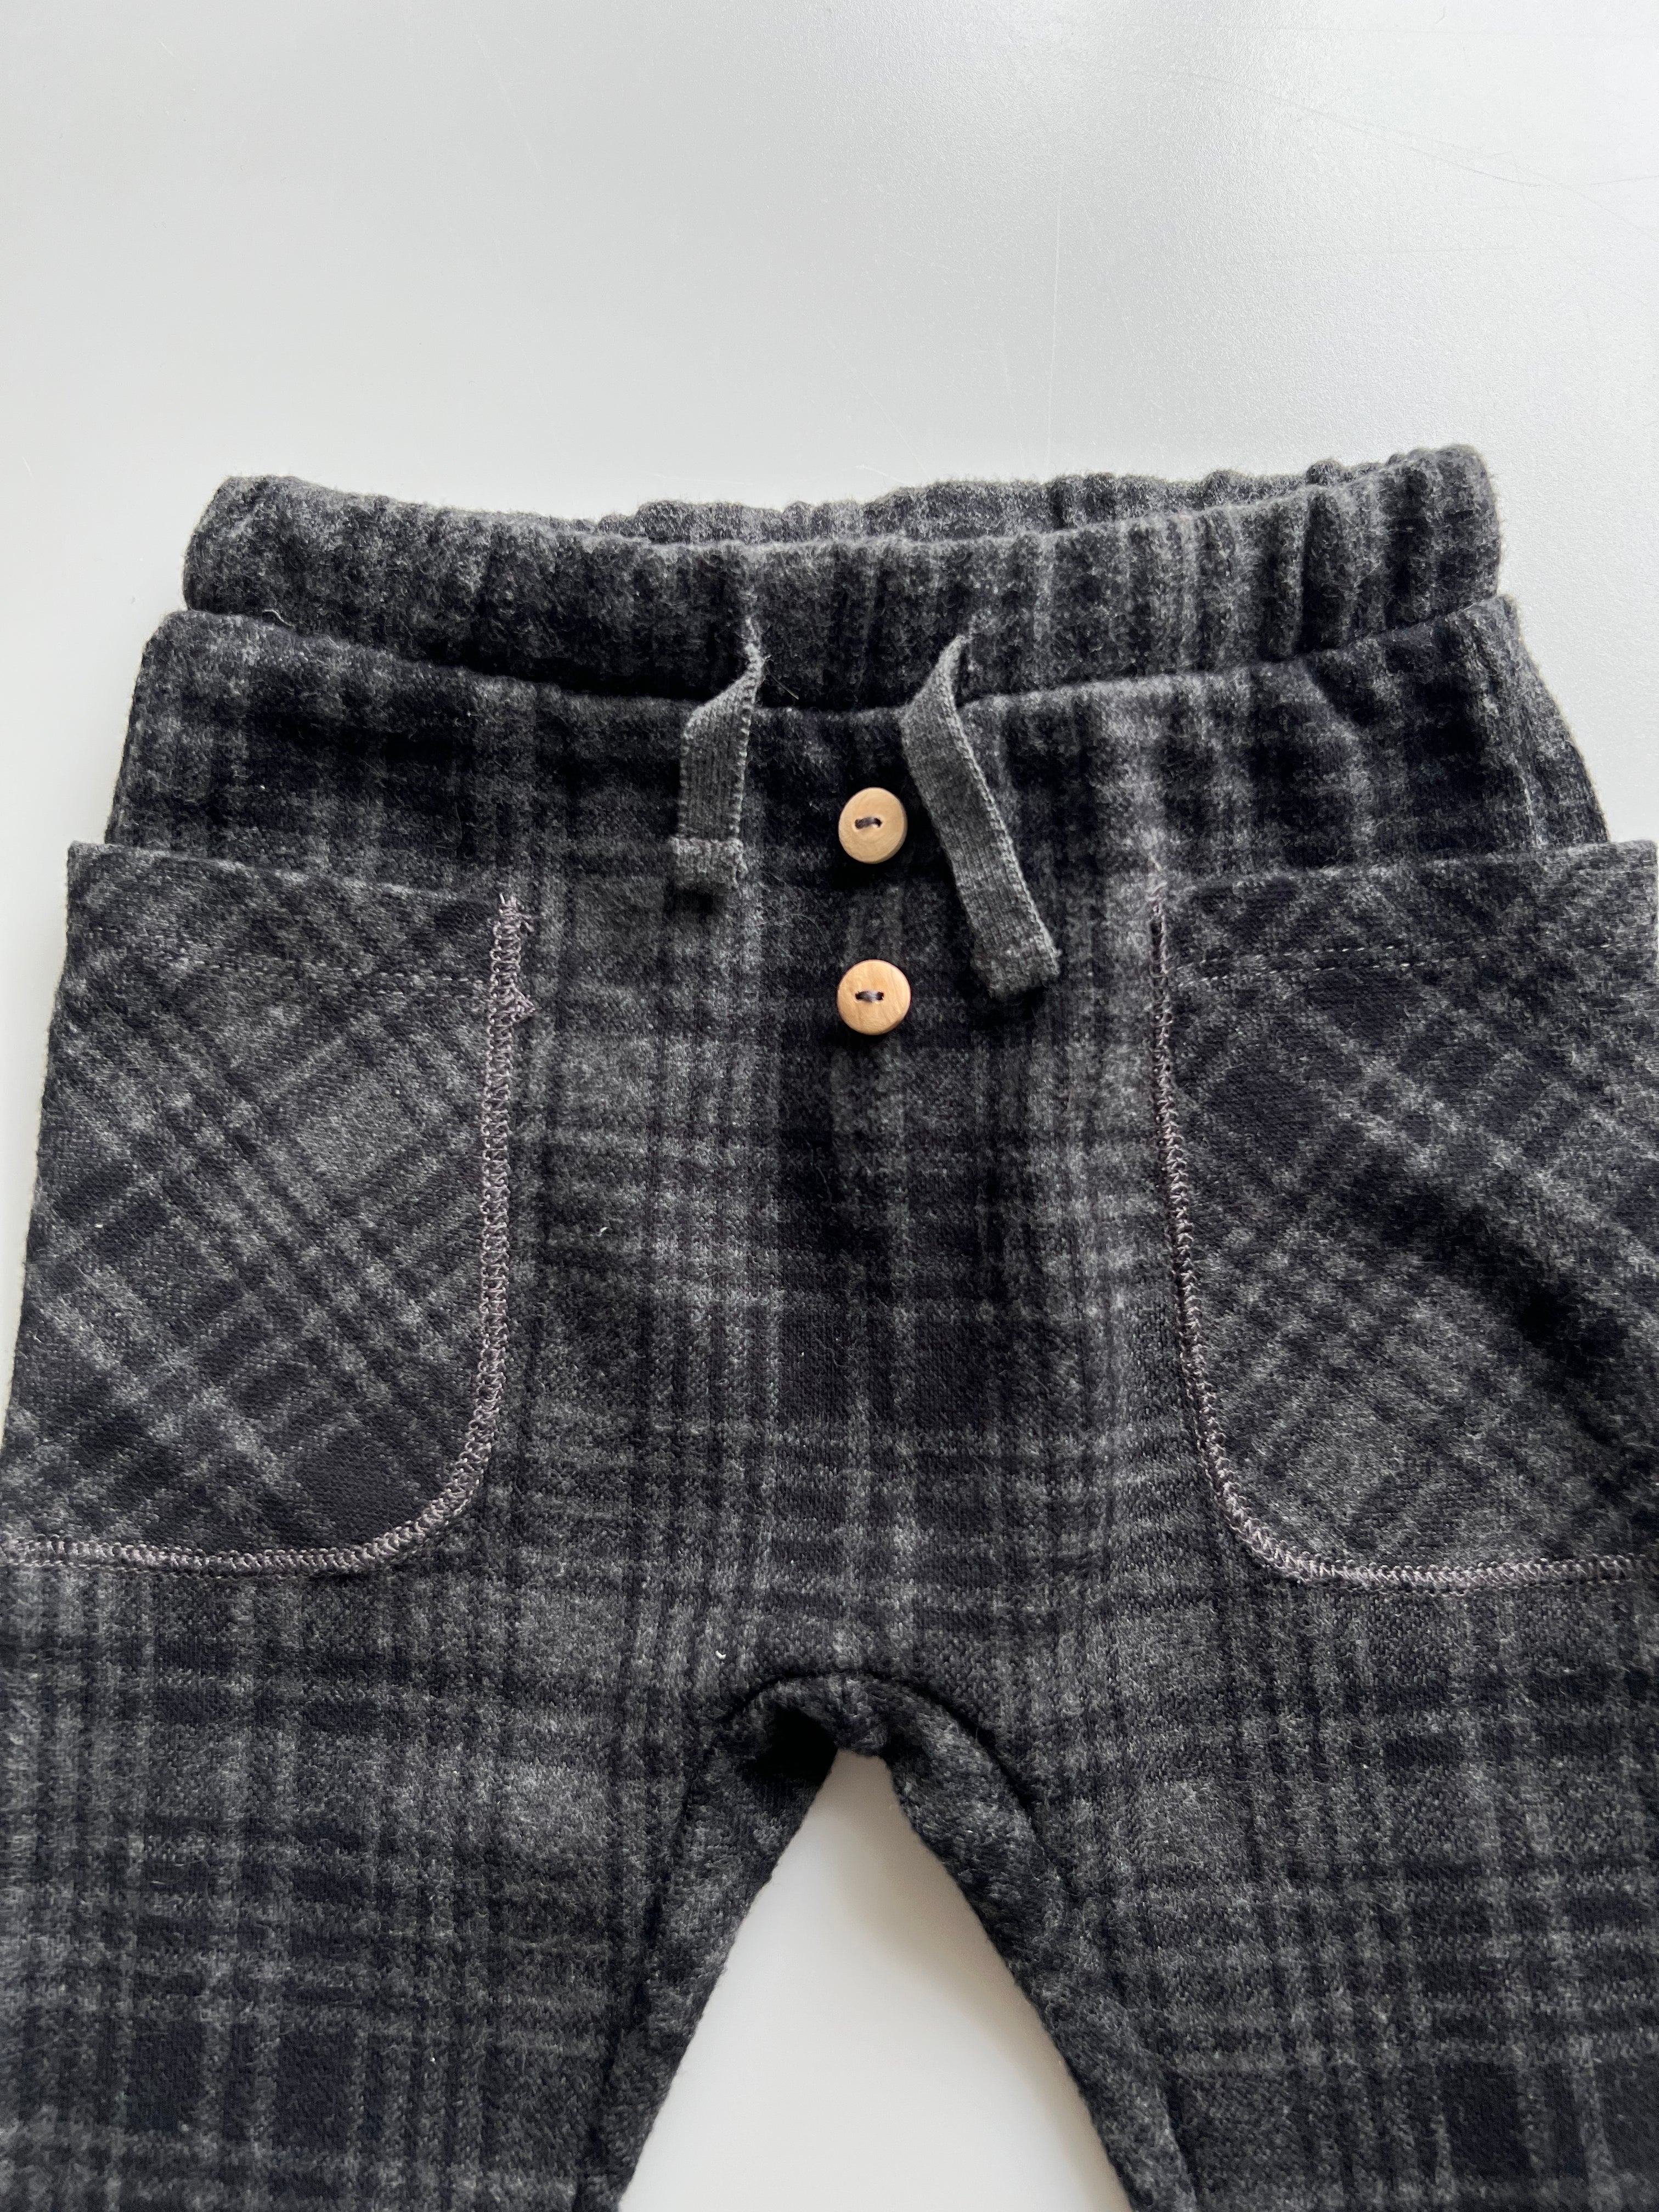 Zara Super Soft Brushed Trousers 6-9 Months